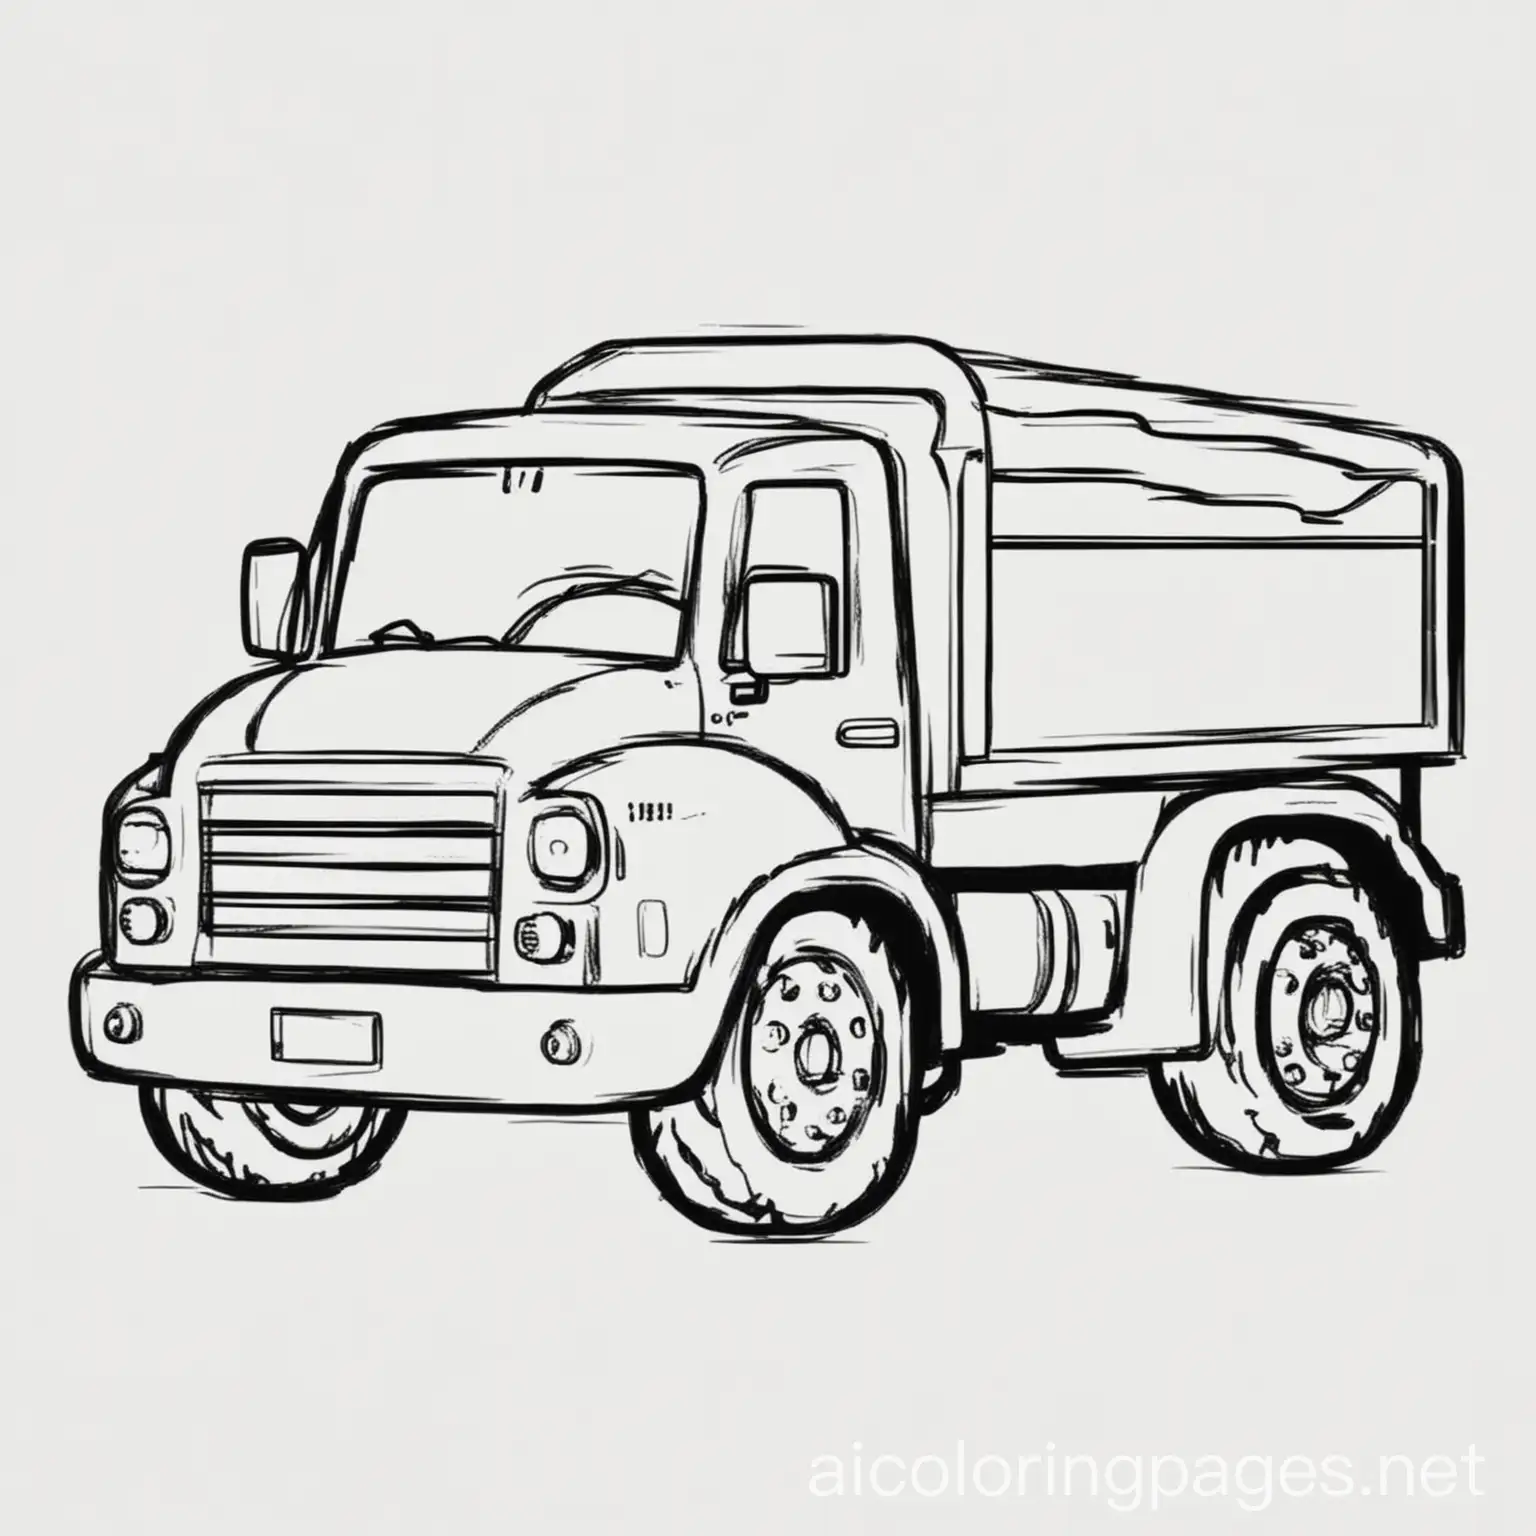 truck for a toddler to color, Coloring Page, black and white, line art, white background, Simplicity, Ample White Space. The background of the coloring page is plain white to make it easy for young children to color within the lines. The outlines of all the subjects are easy to distinguish, making it simple for kids to color without too much difficulty